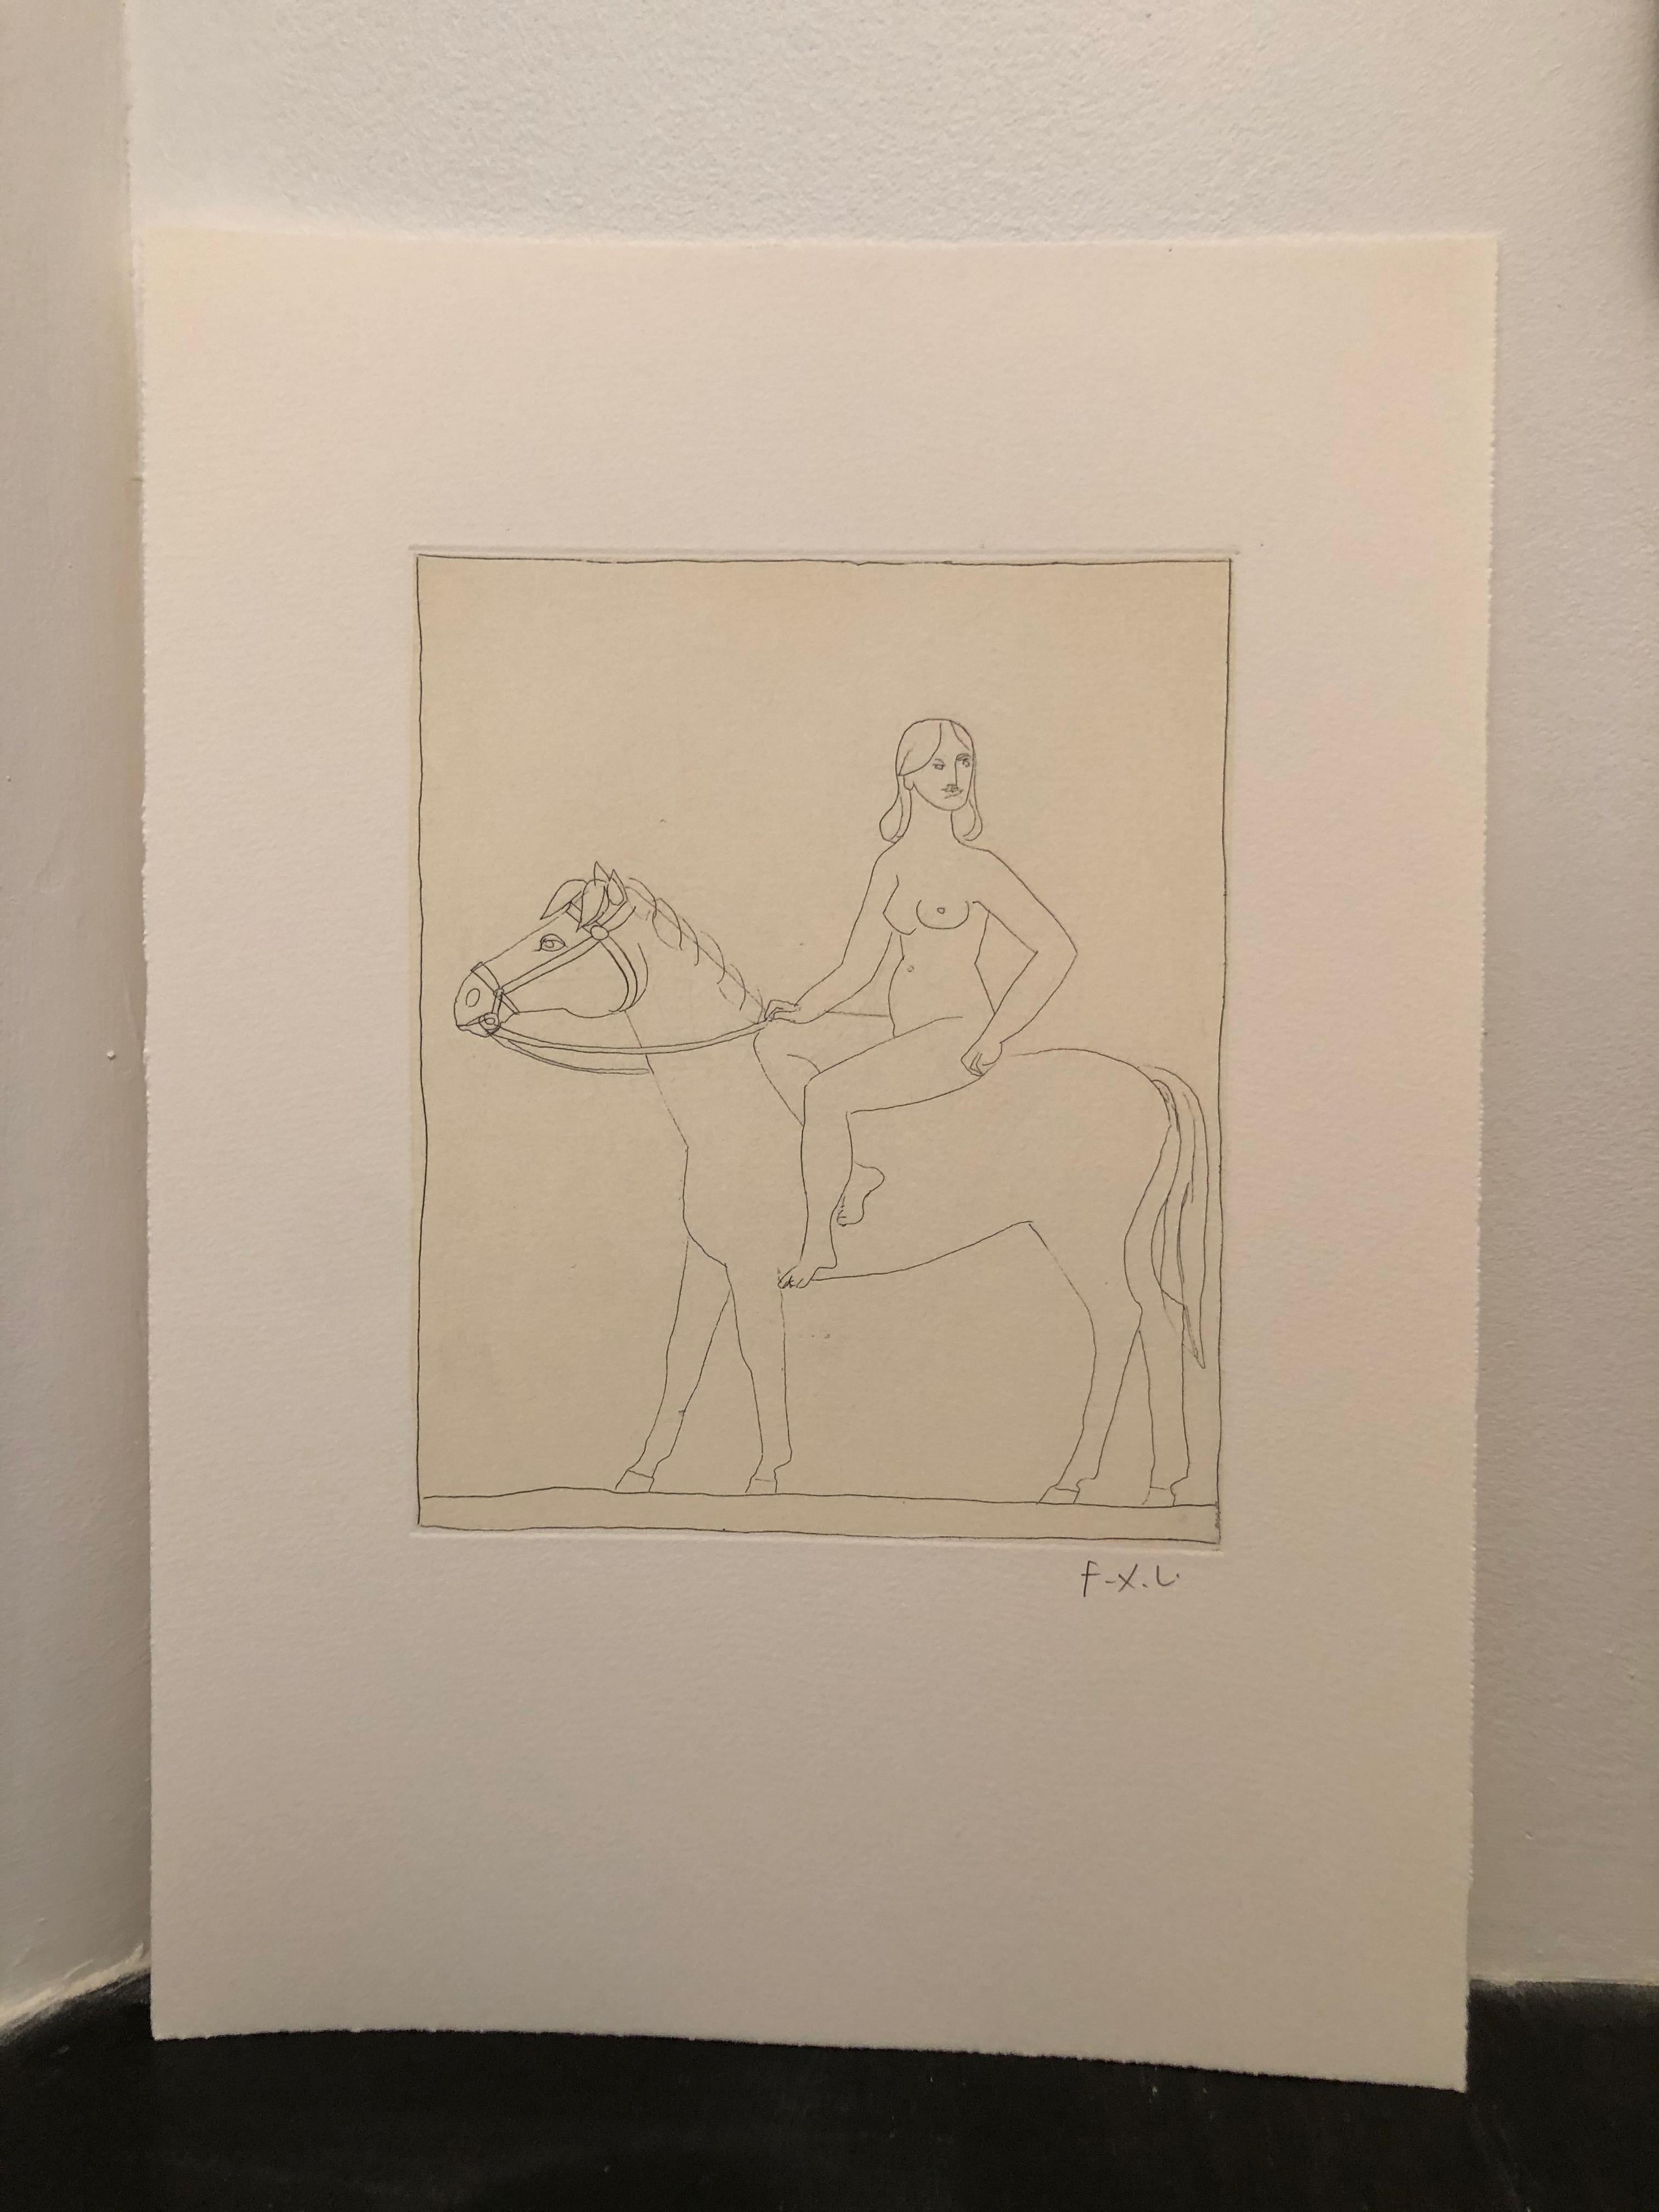 Francois-Xavier Lalanne (1927-2008) Woman and Horse, 2002
Techniques : etching on paper 
Hand signed in pencil by François Xavier Lalanne, in perfect condition


Dimensions of the paper : 38 x 28 cm (14,96 x 11 inches)
Dimensions of the etching